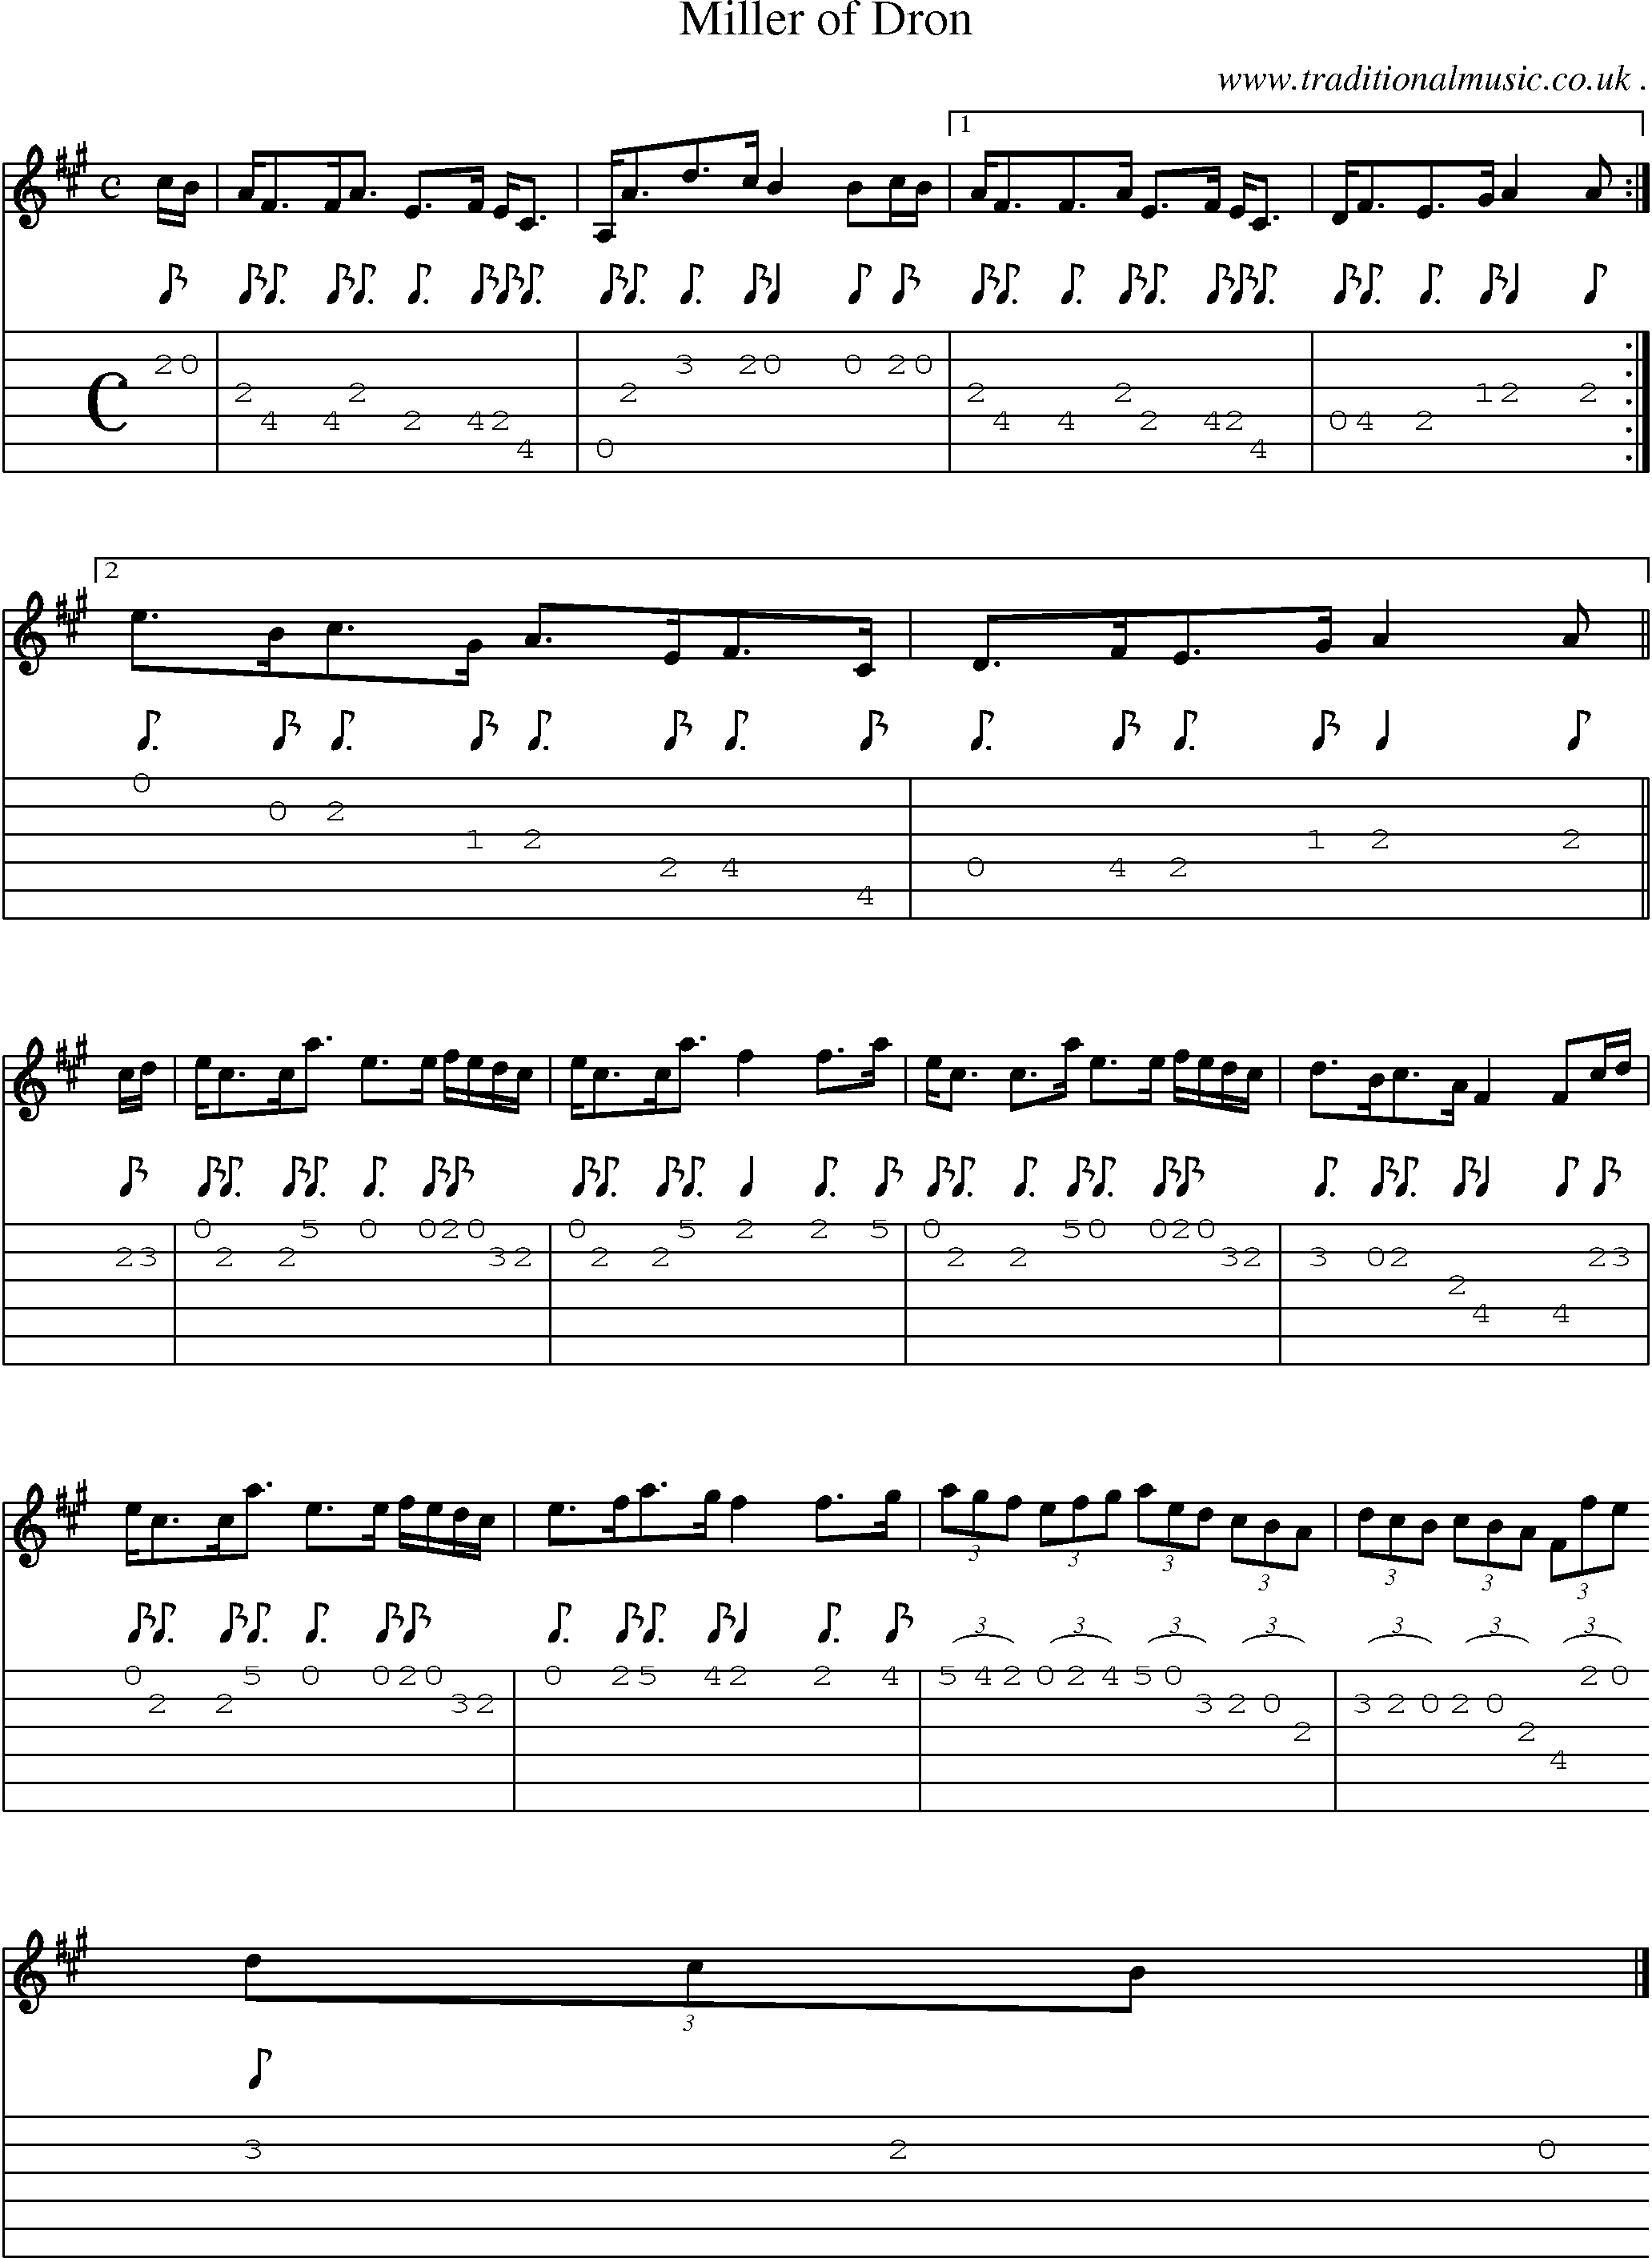 Sheet-music  score, Chords and Guitar Tabs for Miller Of Dron